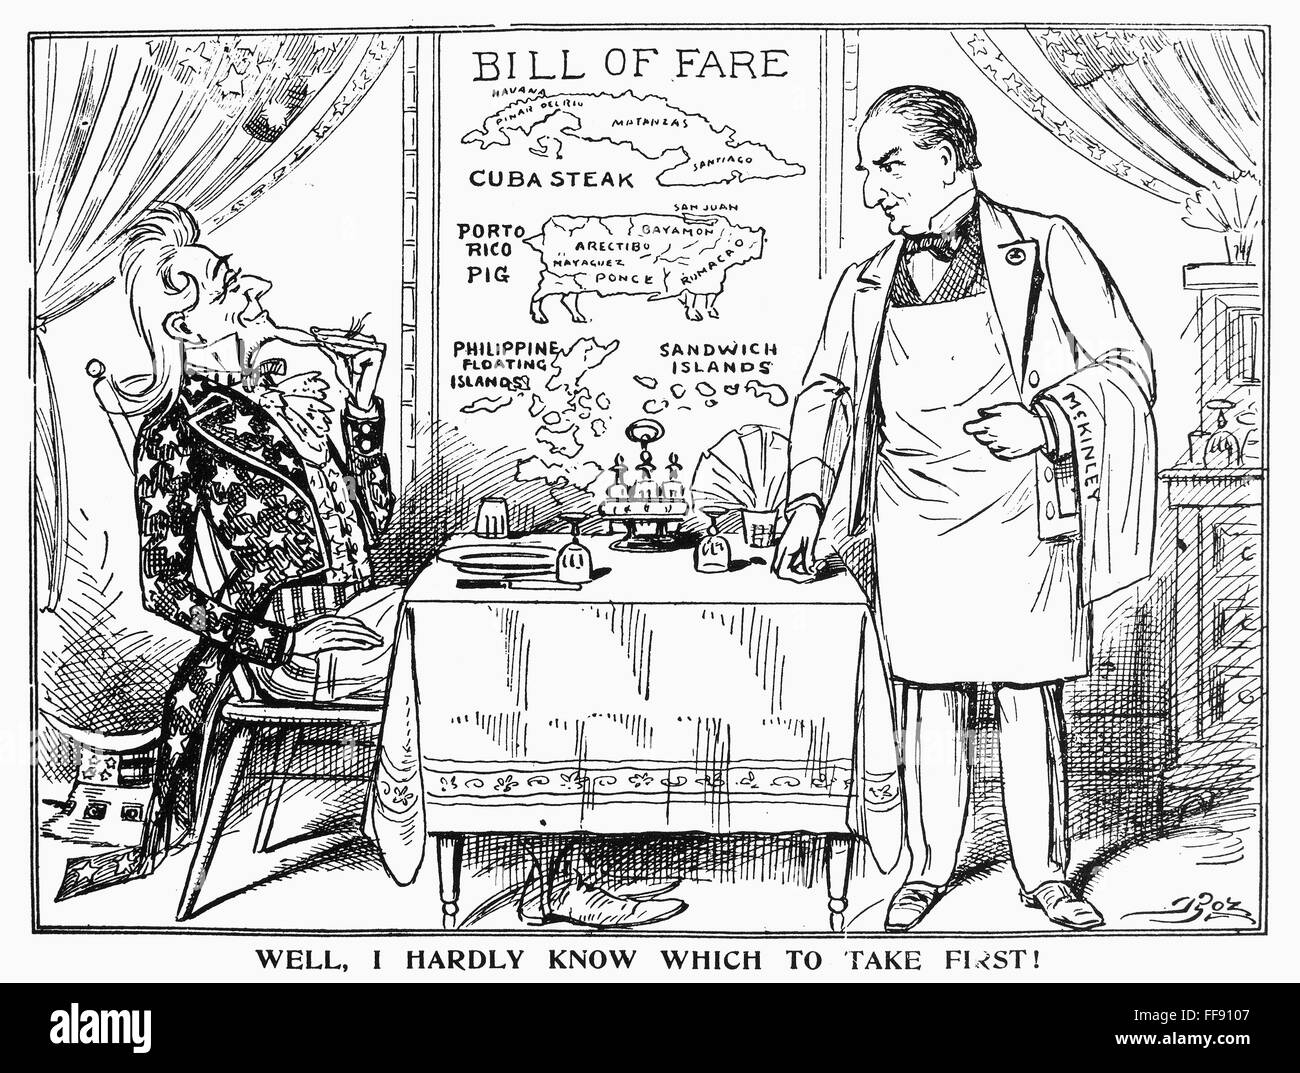 IMPERIALISM CARTOON, c1900. /n'Well, I Hardly Know Which To Take First!' American  cartoon comment, c1900, on Uncle Sam's seemingly insatiable imperialist  appetite, as President William McKinley, at right, waits to take the